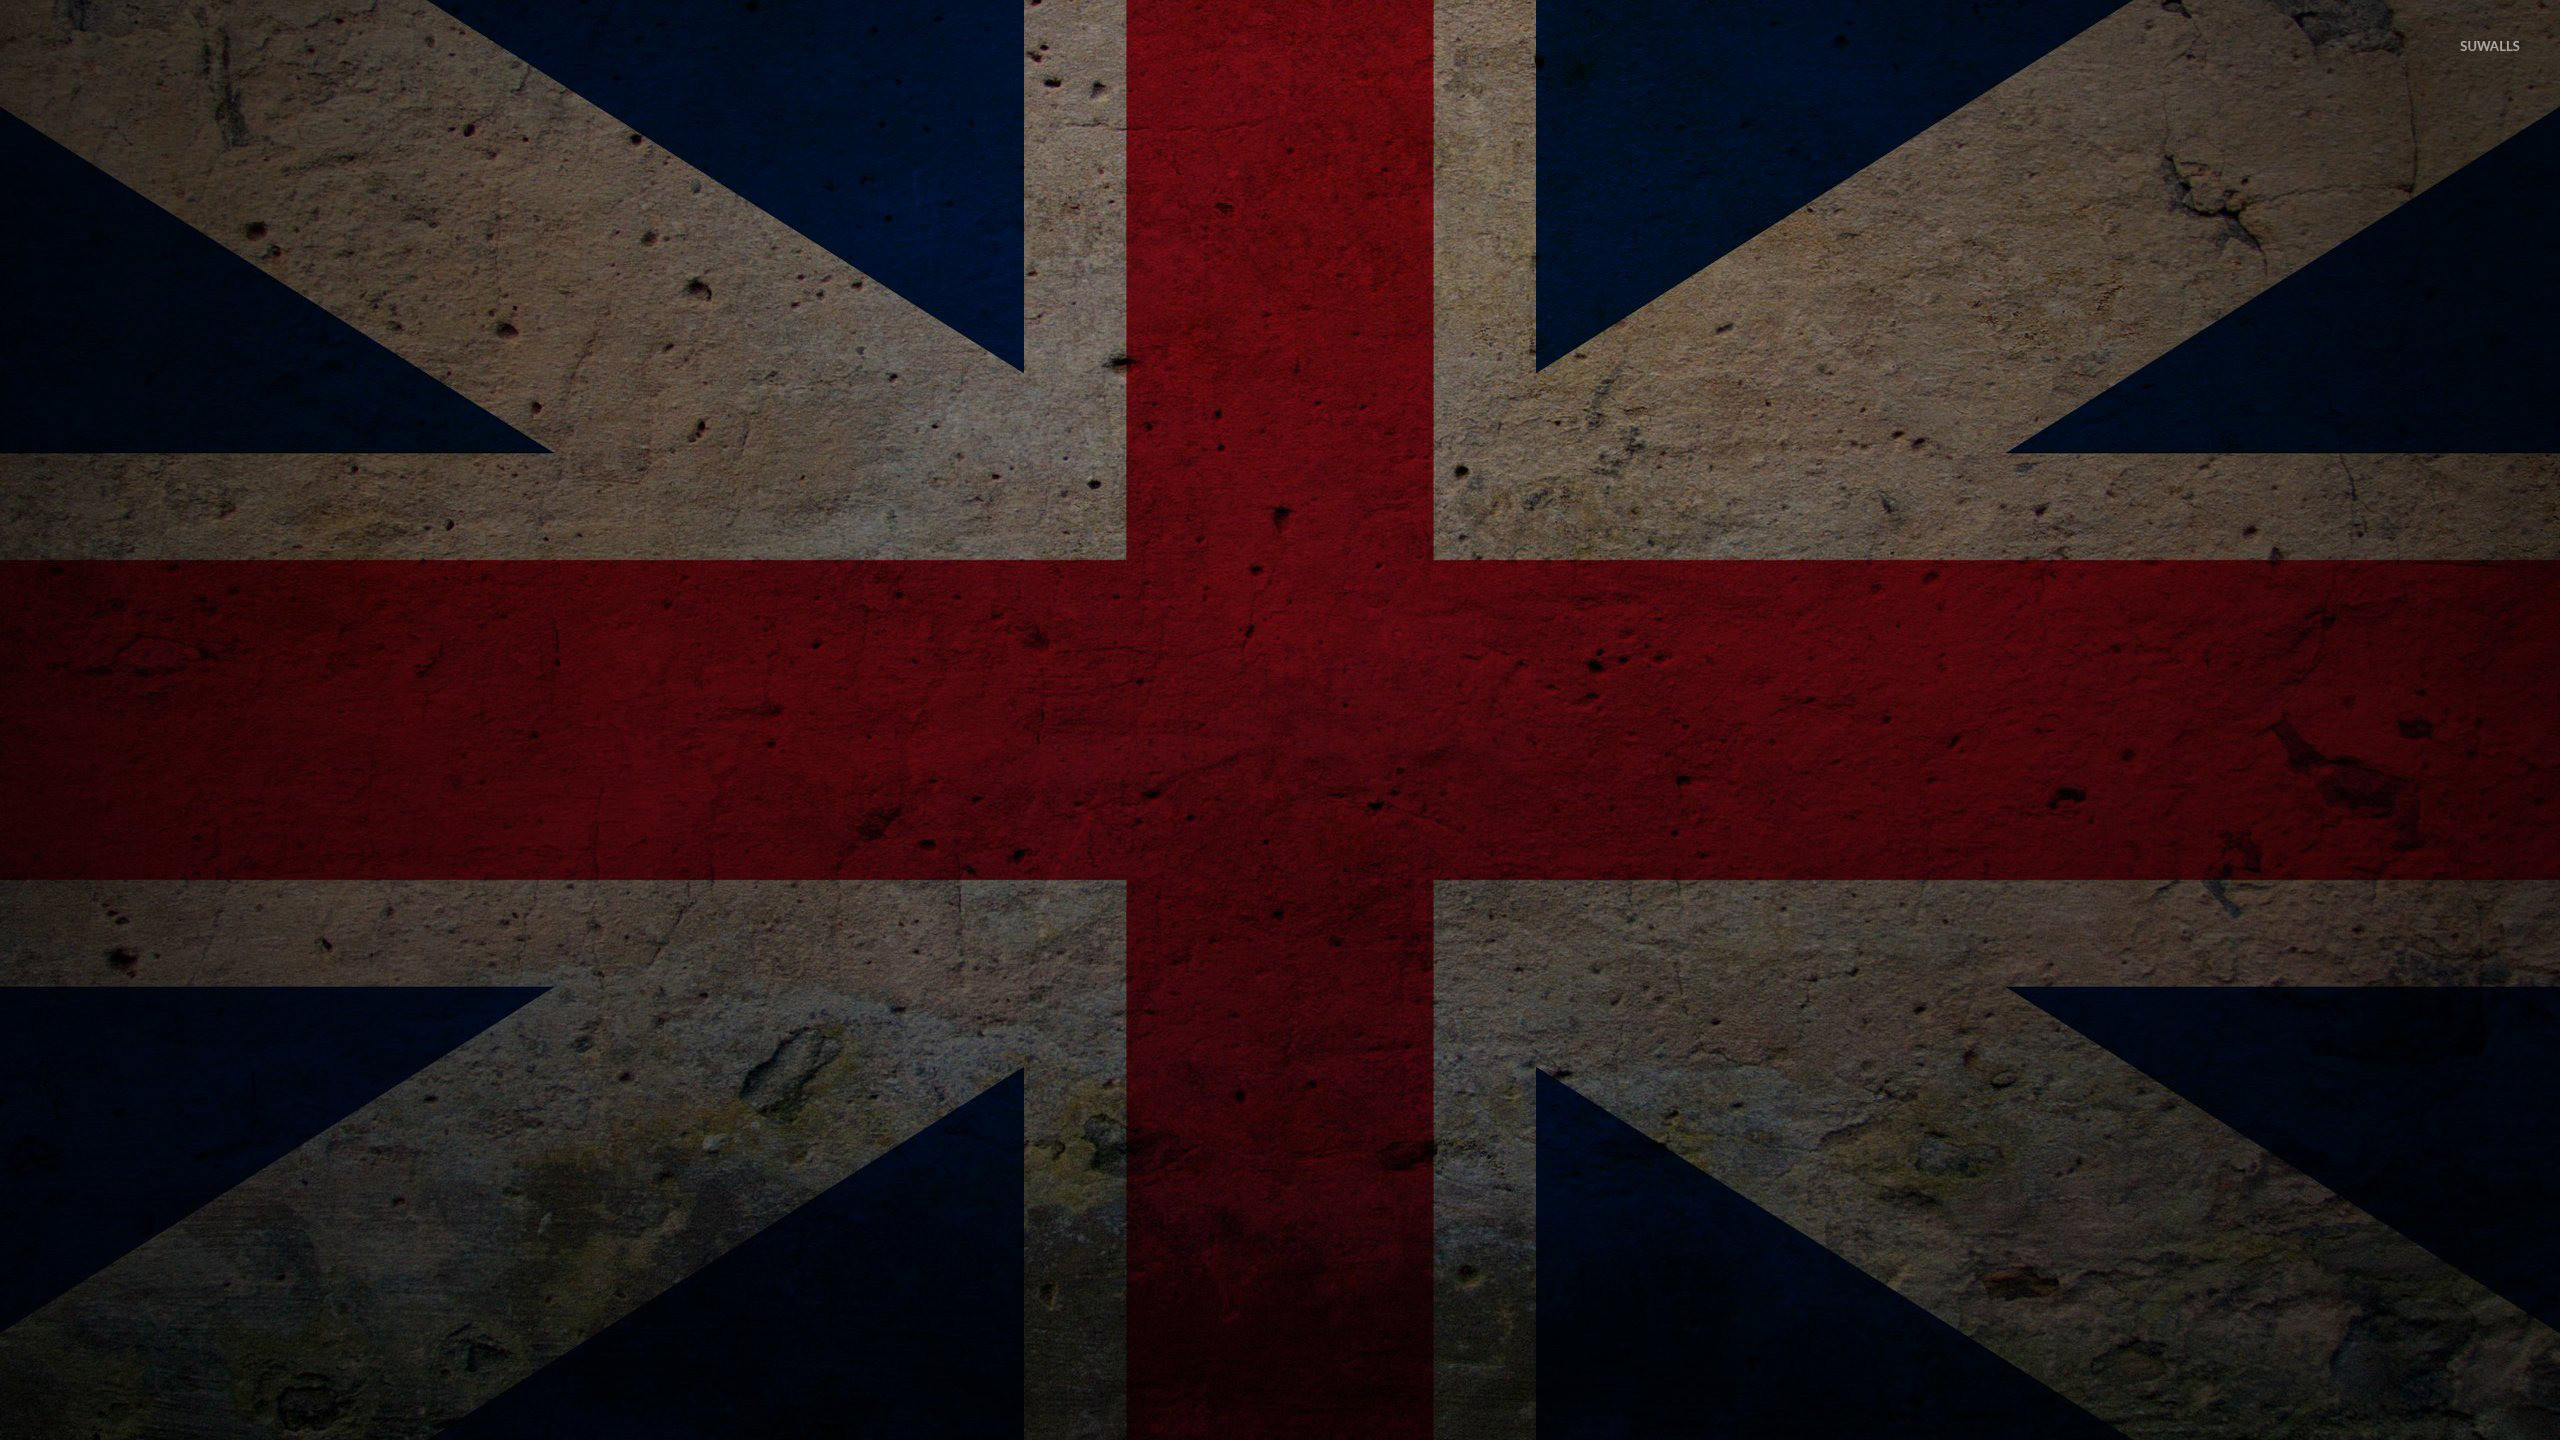 2560x1440 Free Union Jack HD Wallpapers mobile | HD Wallpapers | Pinterest | Union  jack, Hd wallpaper and Wallpaper